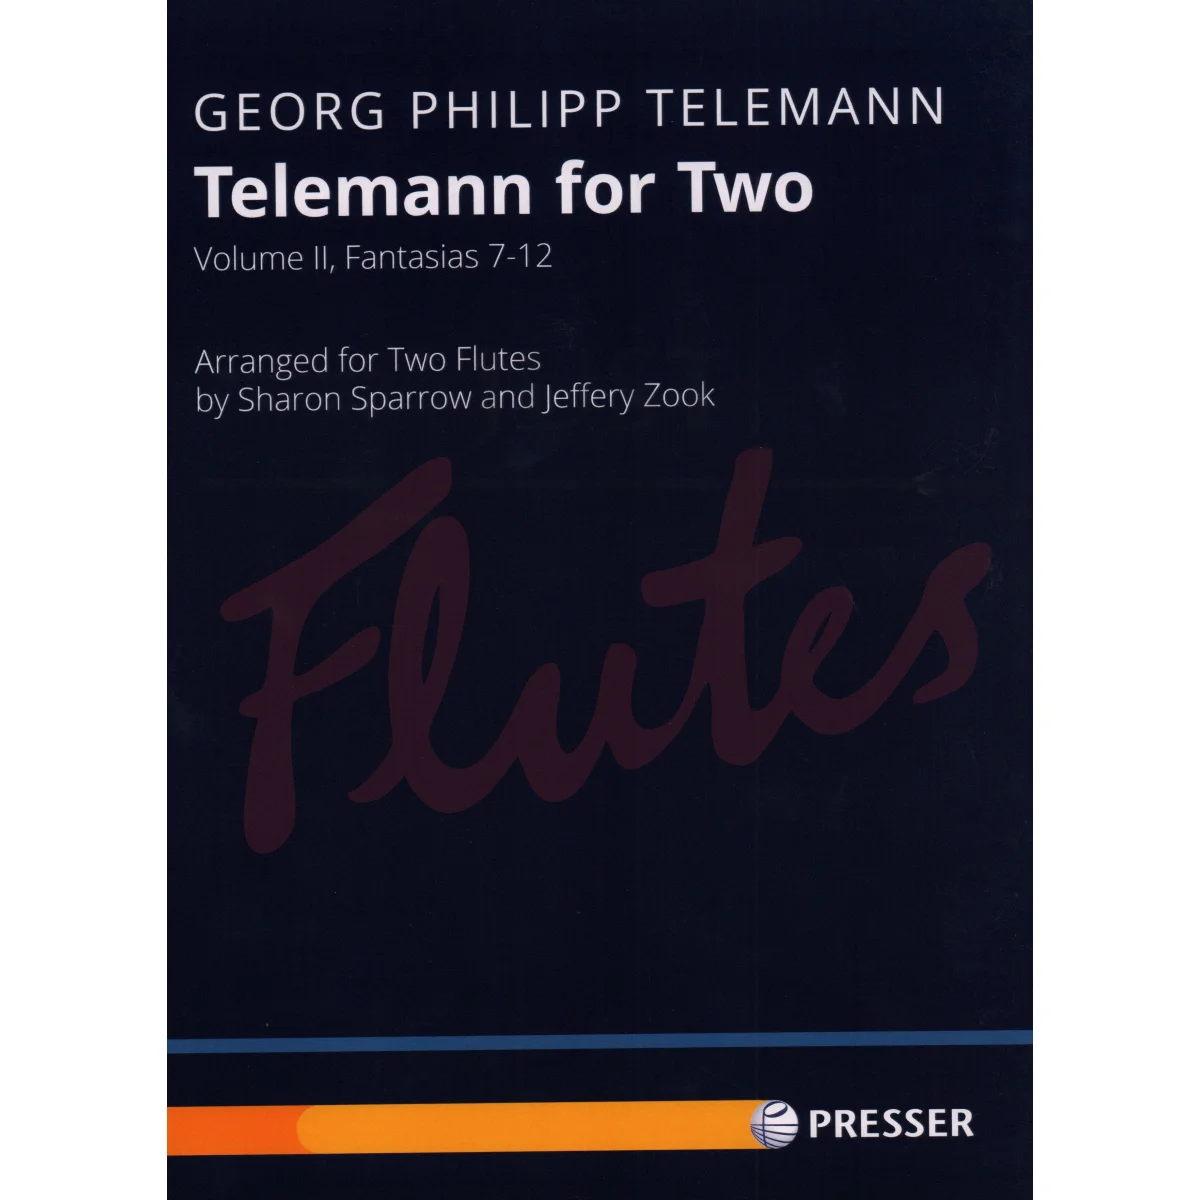 Telemann for Two, Volume 2 arranged for Two Flutes